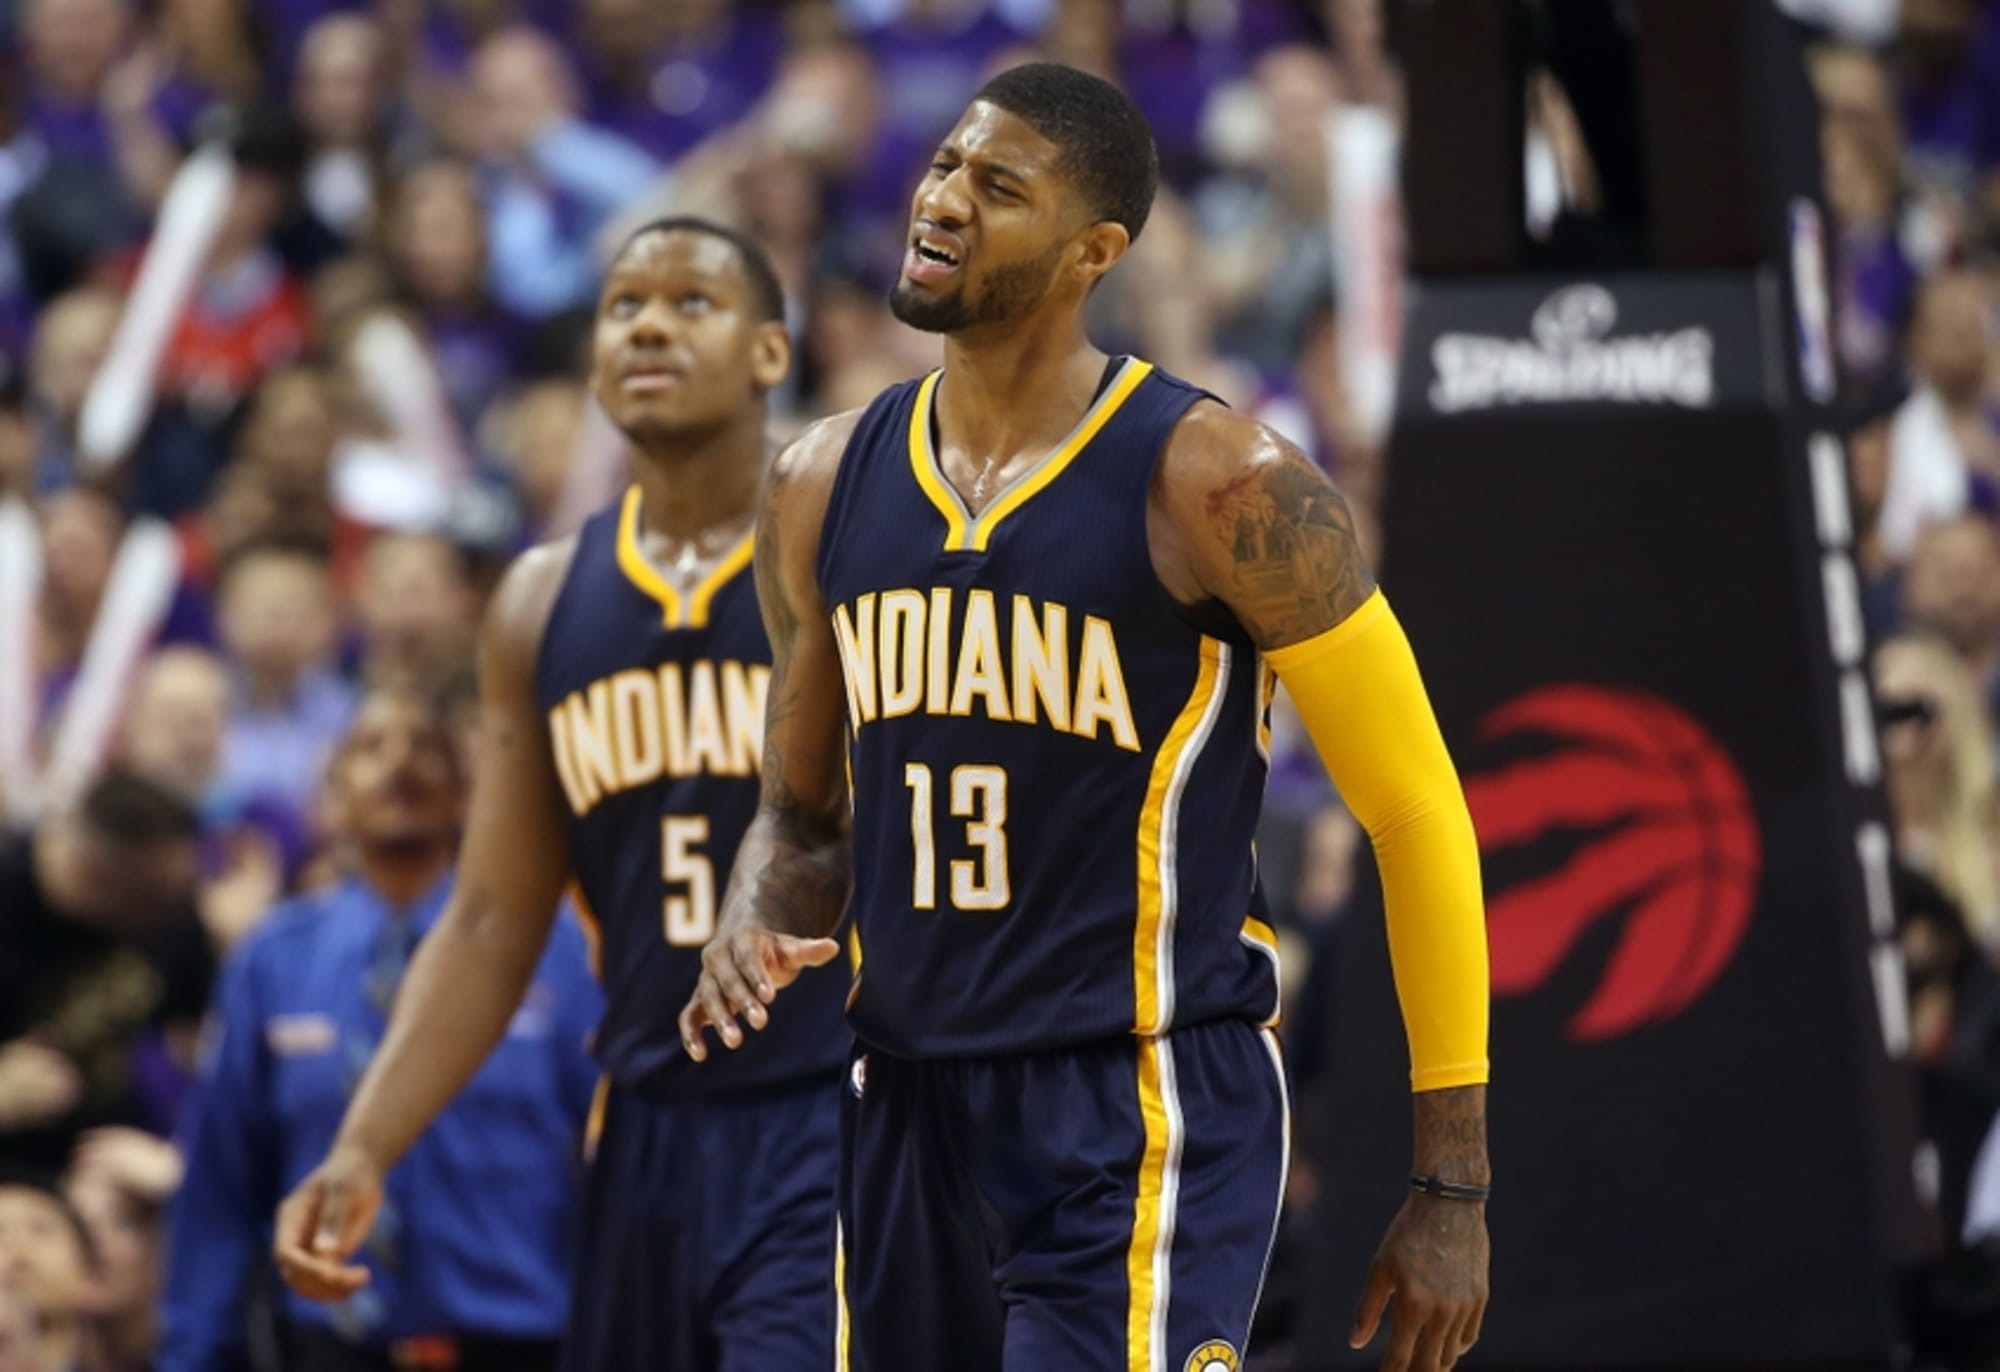 Paul George ready to lead Indiana Pacers to NBA title